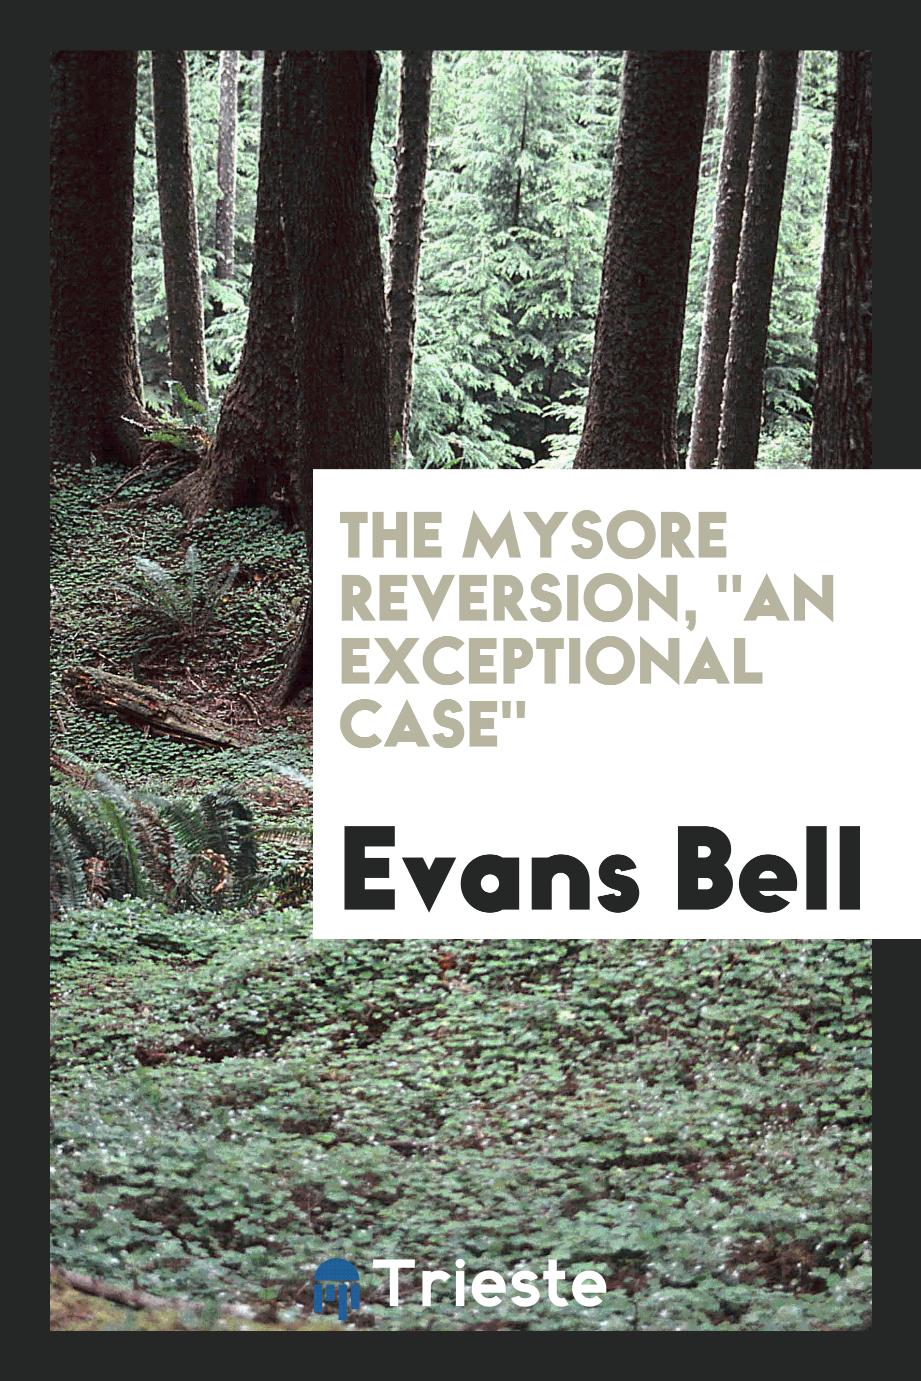 The Mysore Reversion, "An Exceptional Case"